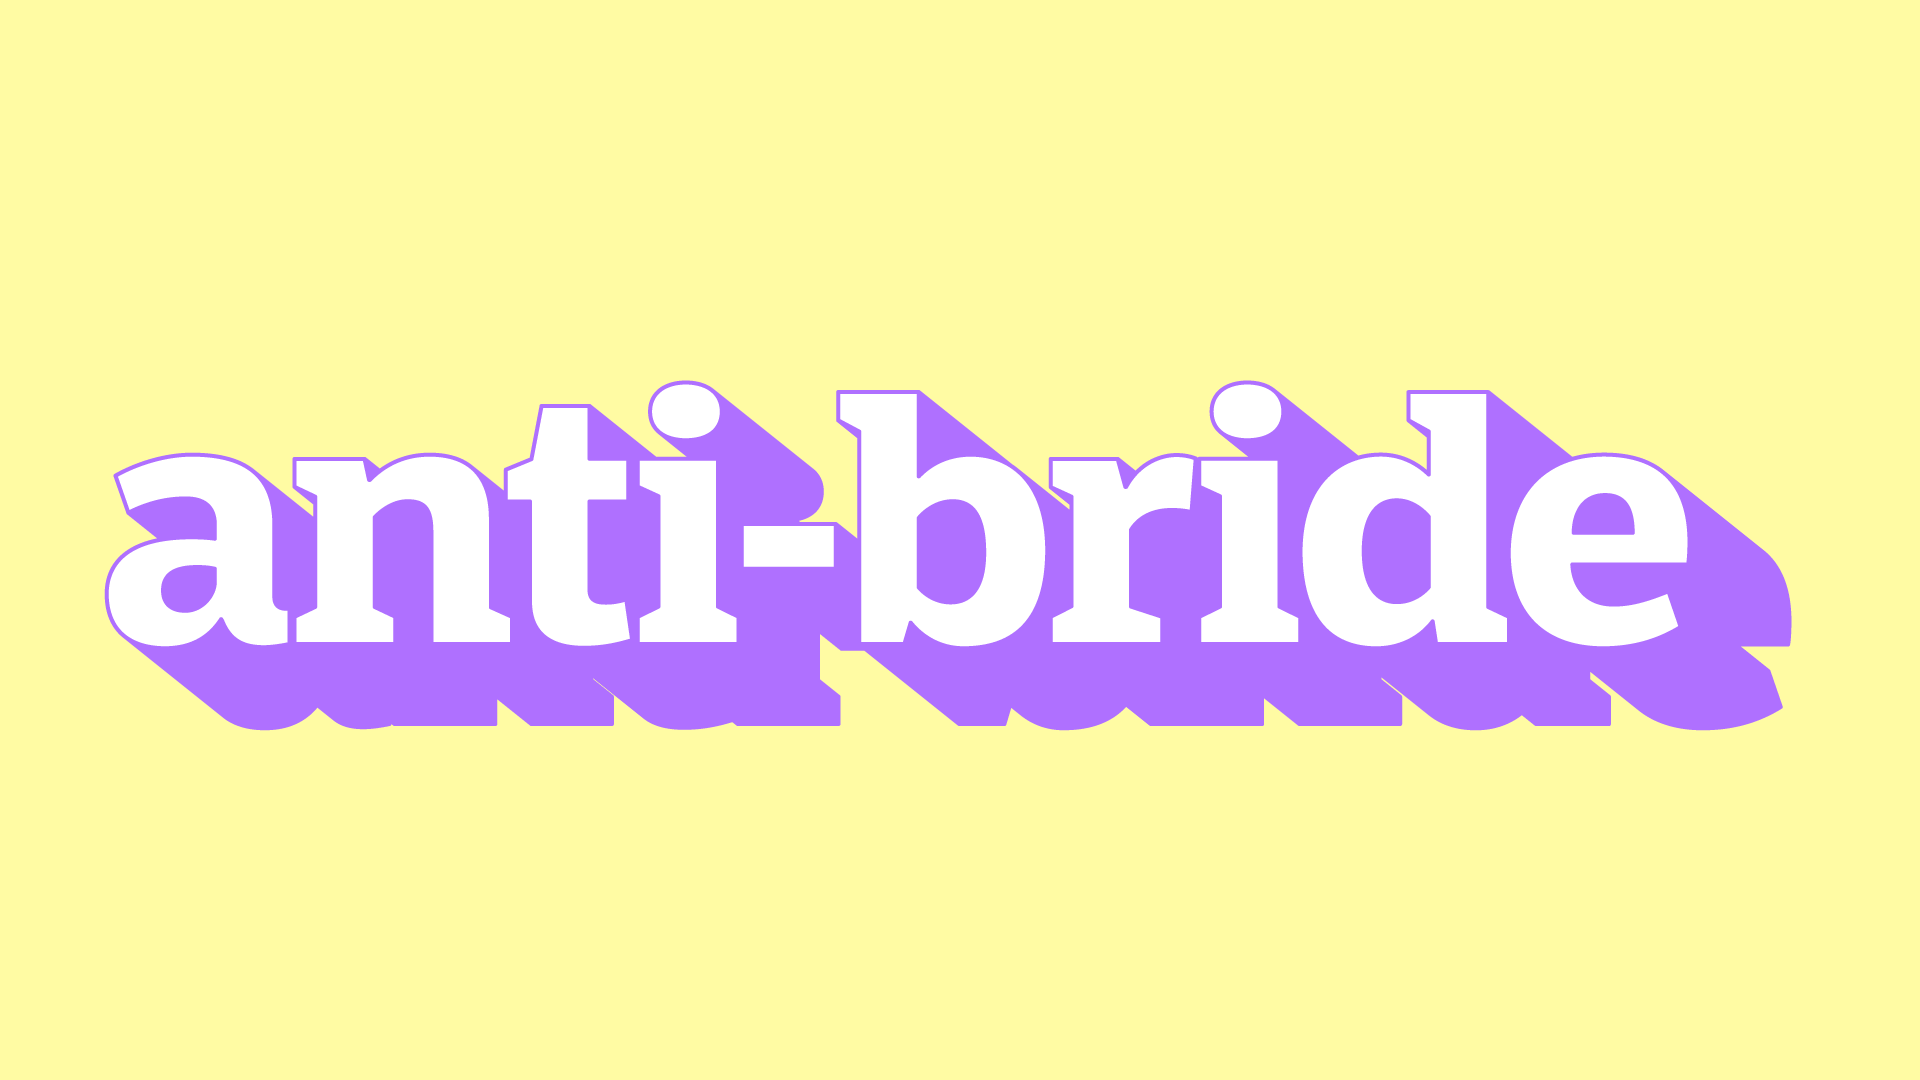 Here Comes The Bride, All Dressed In... Jeans? What Does "Anti-Bride" Mean?